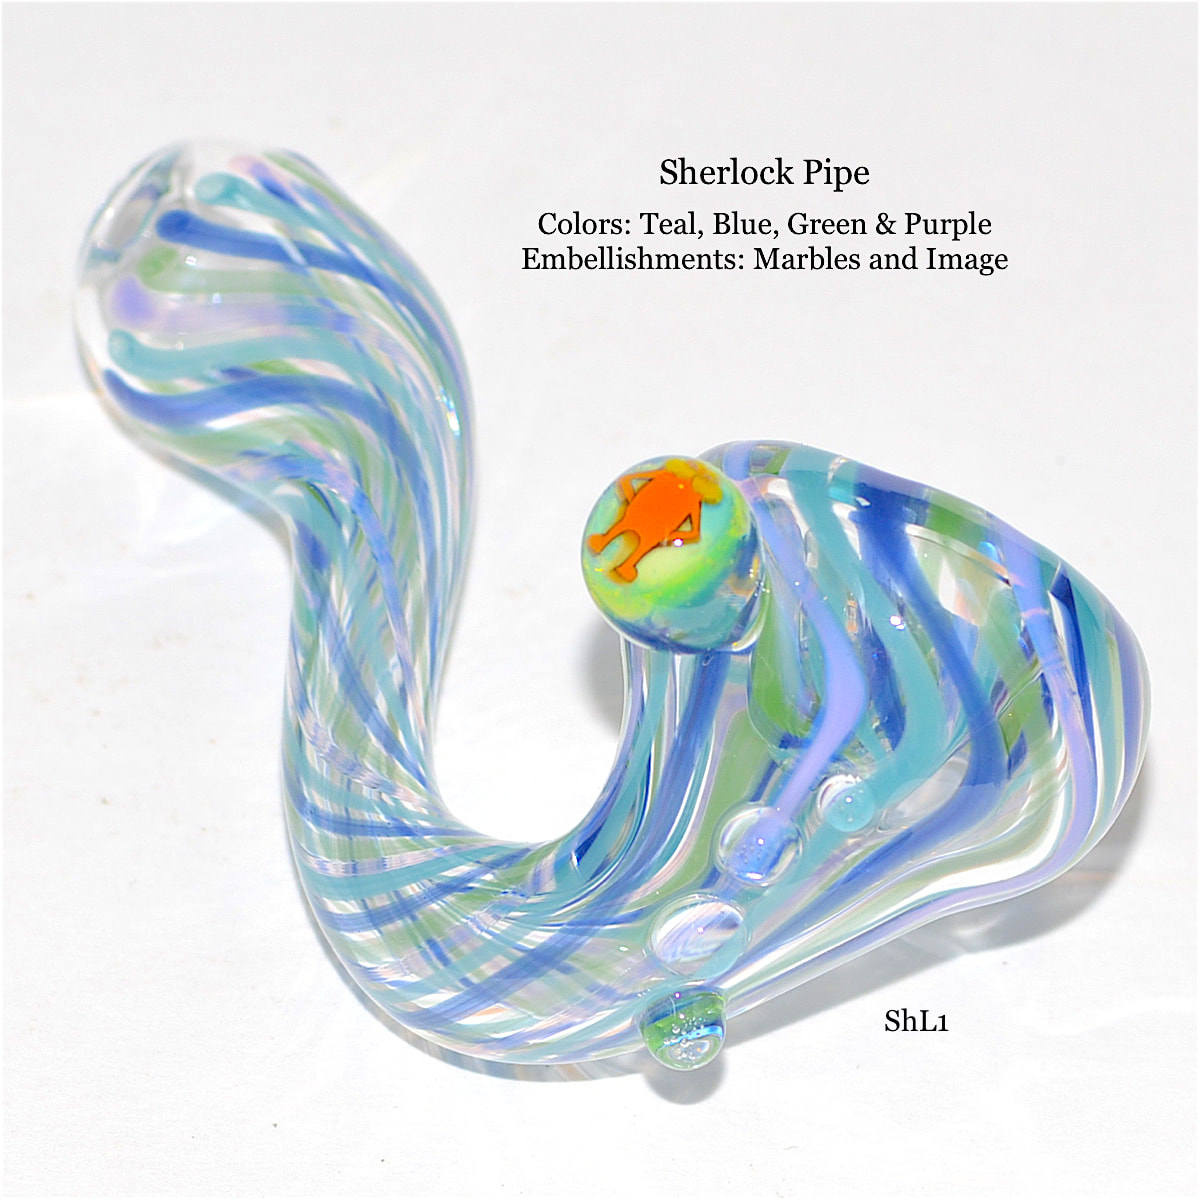 Sleek and Vibrant Handmade Glass Sherlock Pipe With Teal and Black 